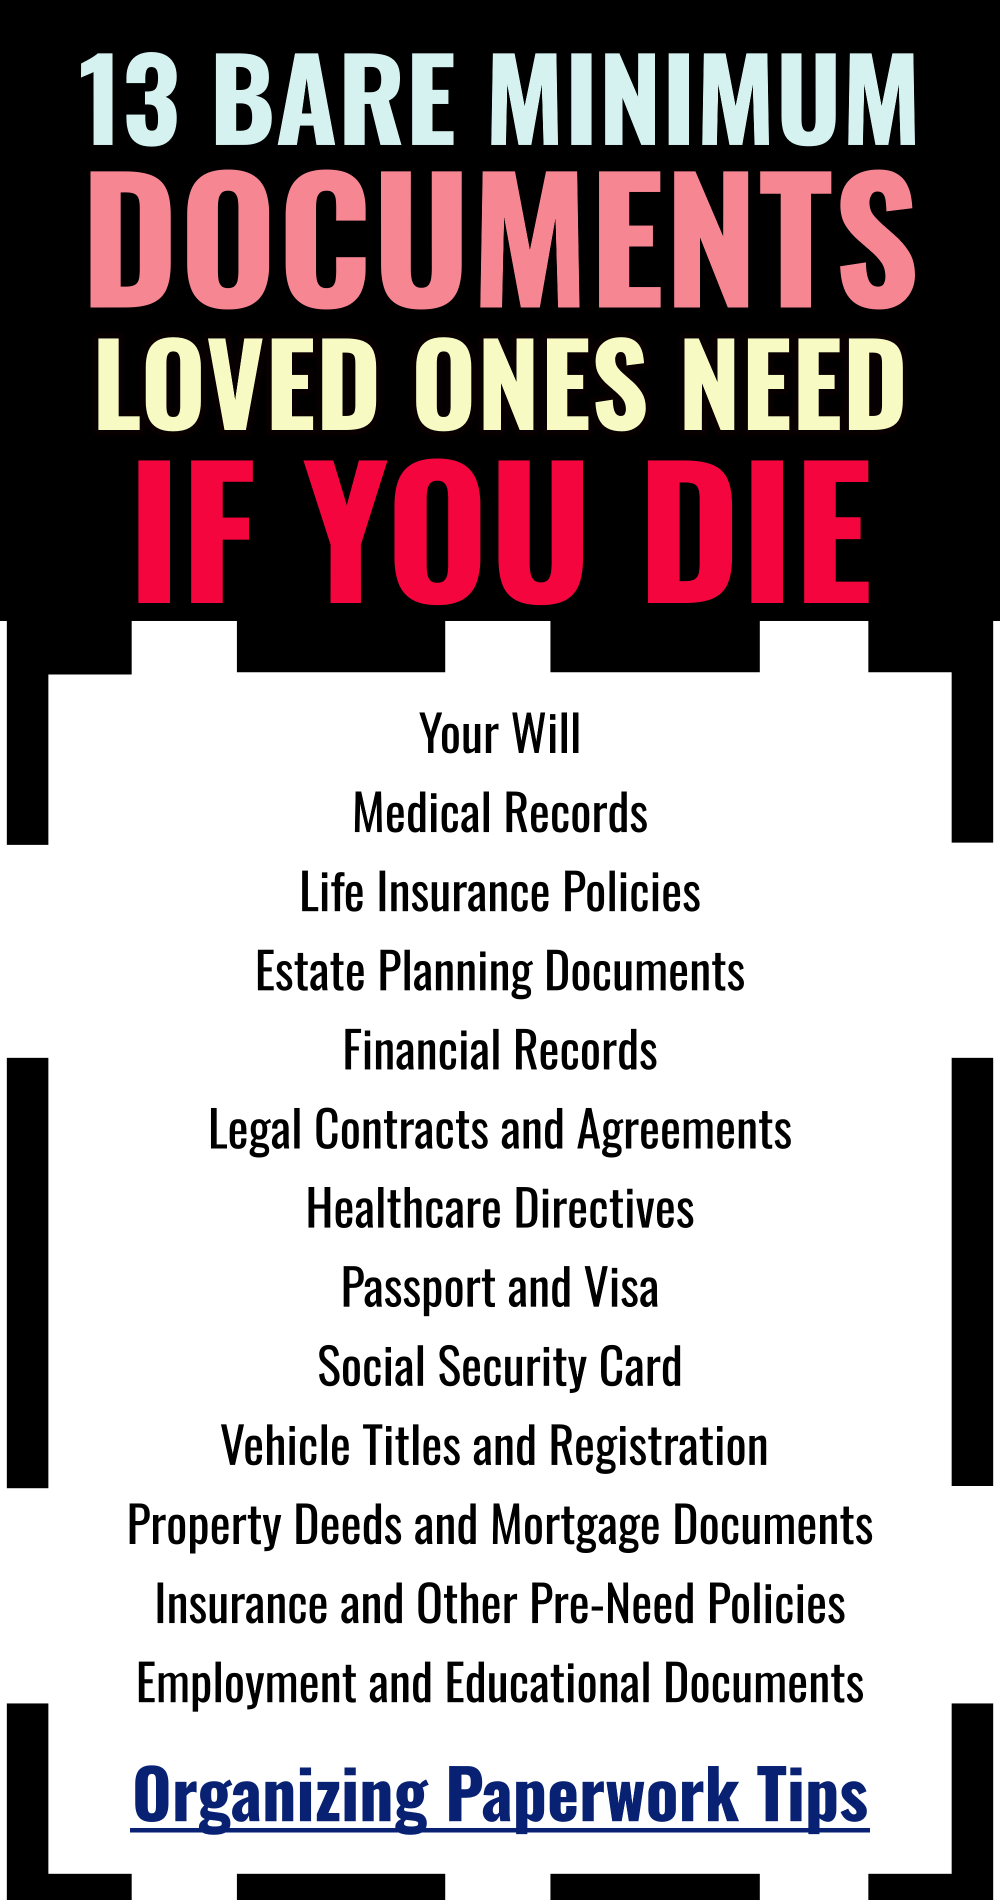 documents needed if you die